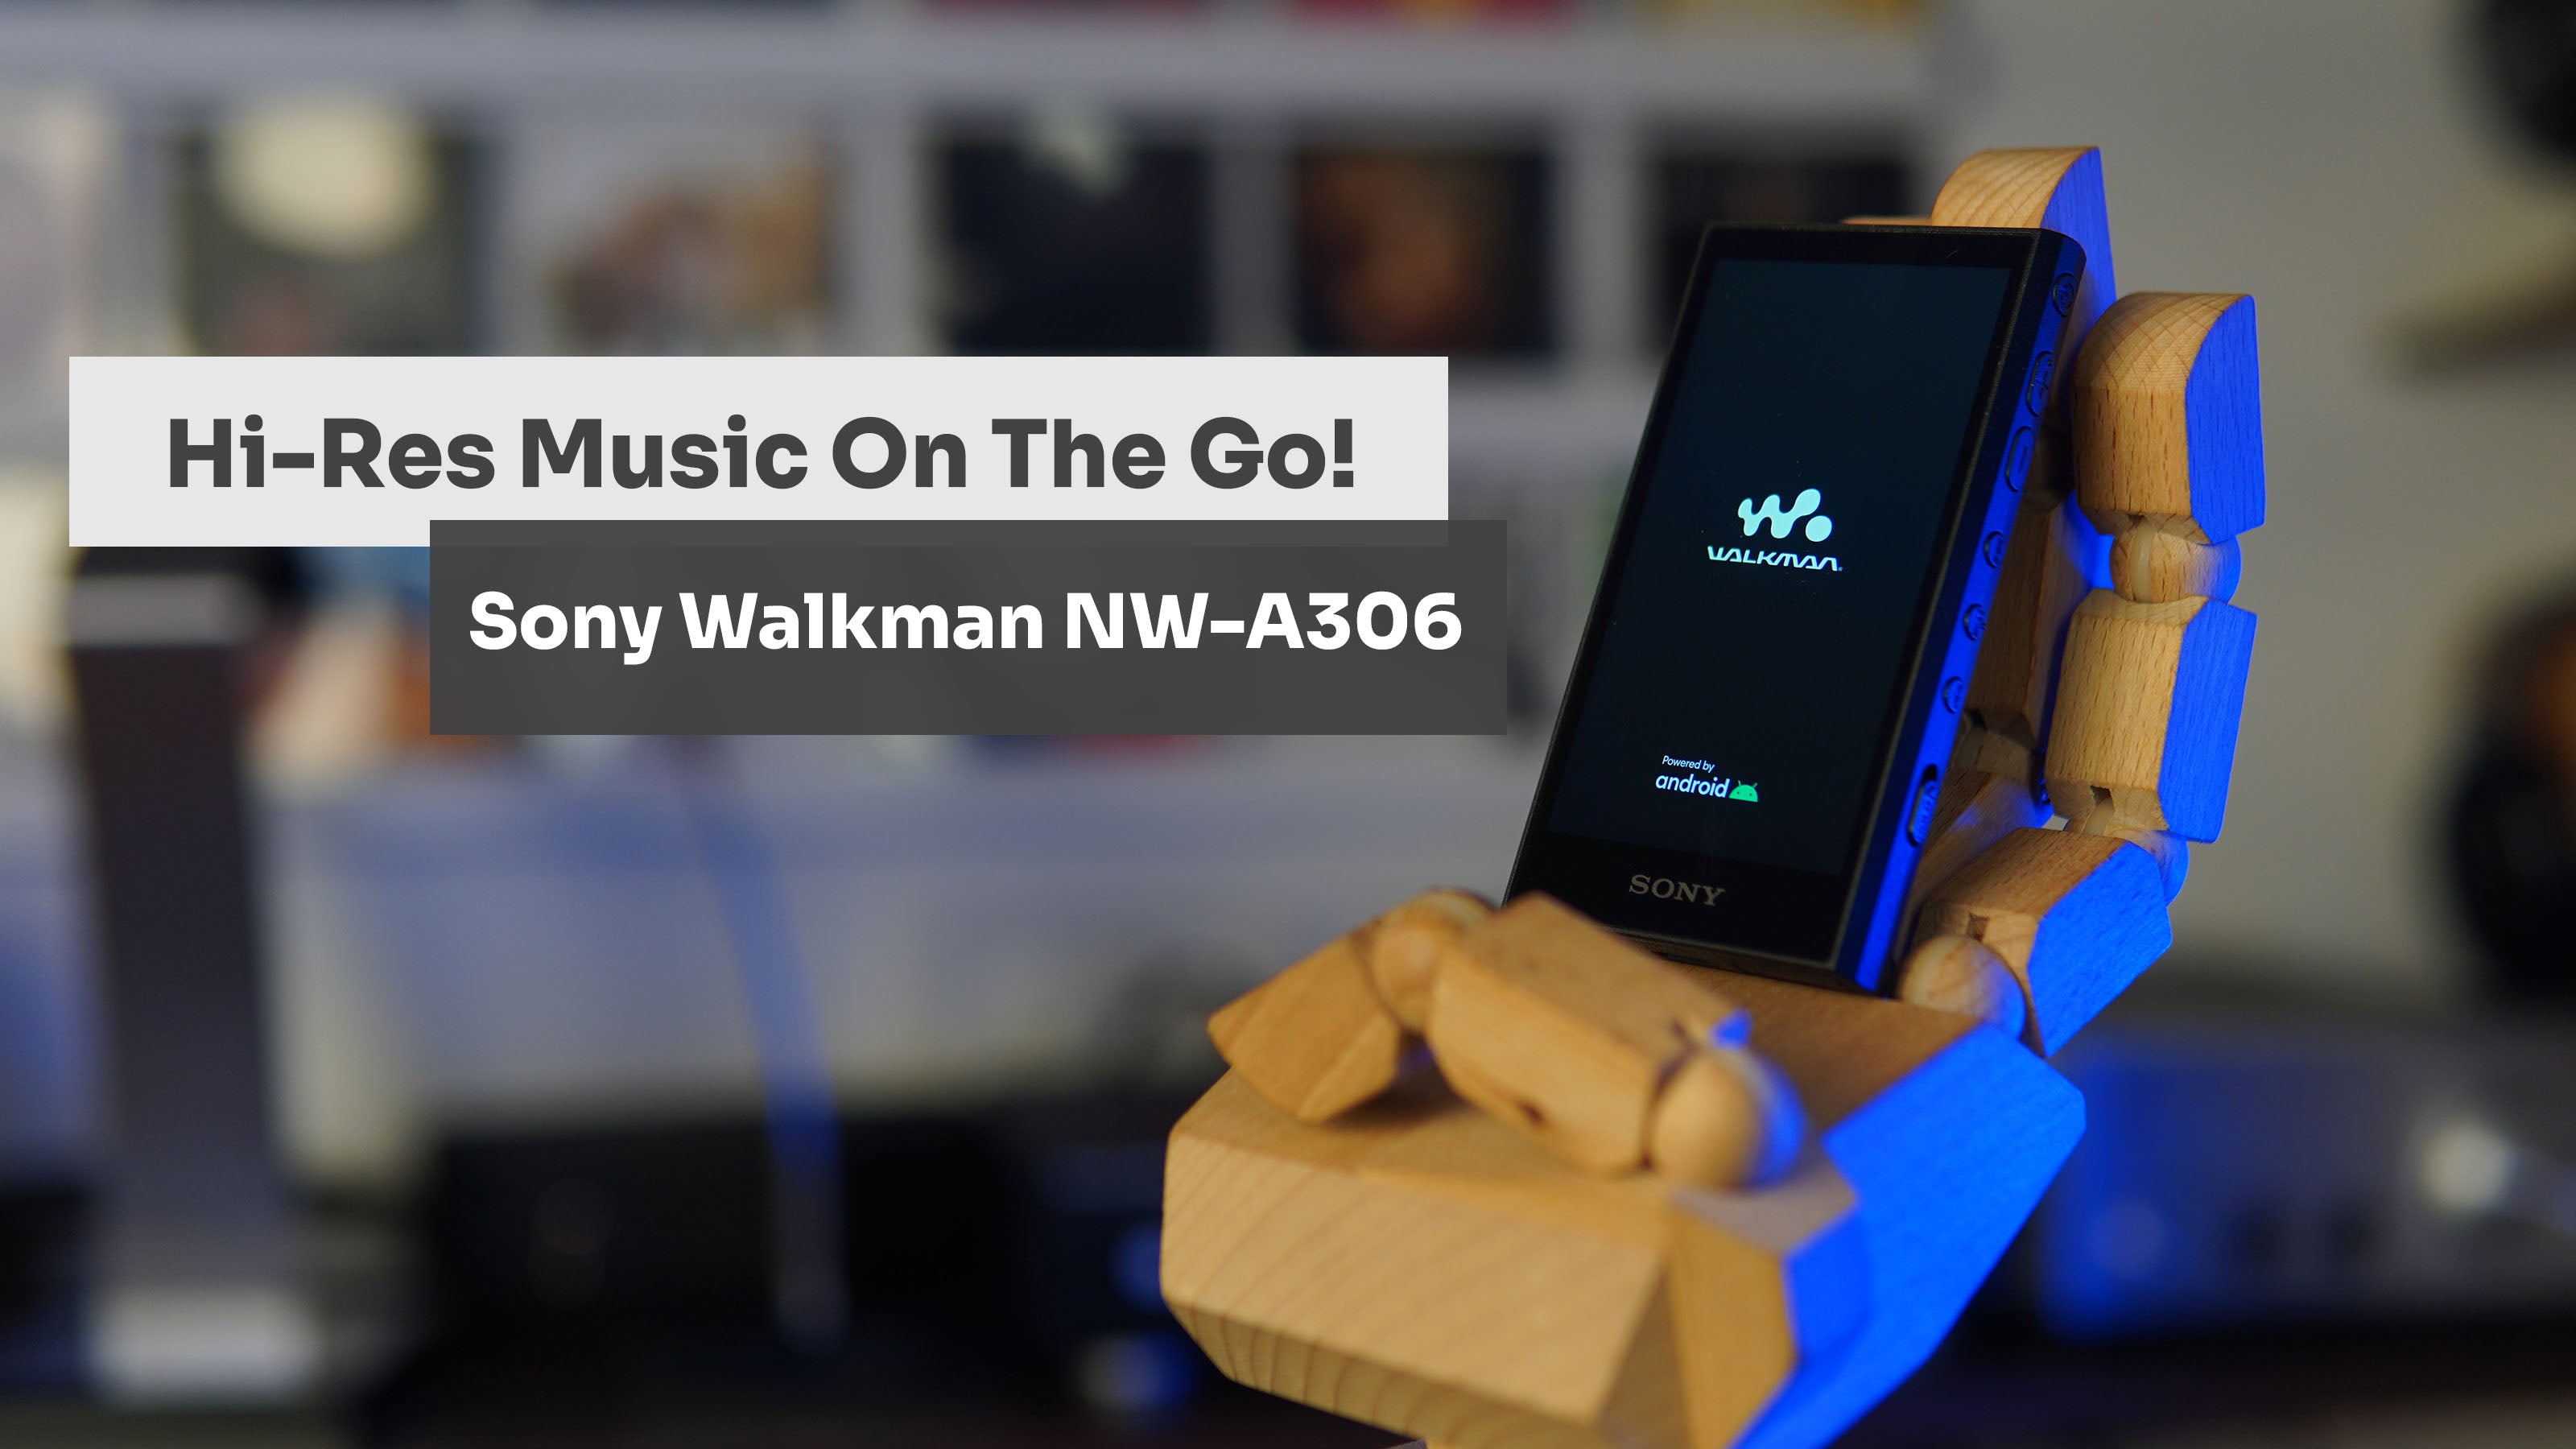 Experience Hi-Res Audio on the Go with the Sony NW-A306 Walkman